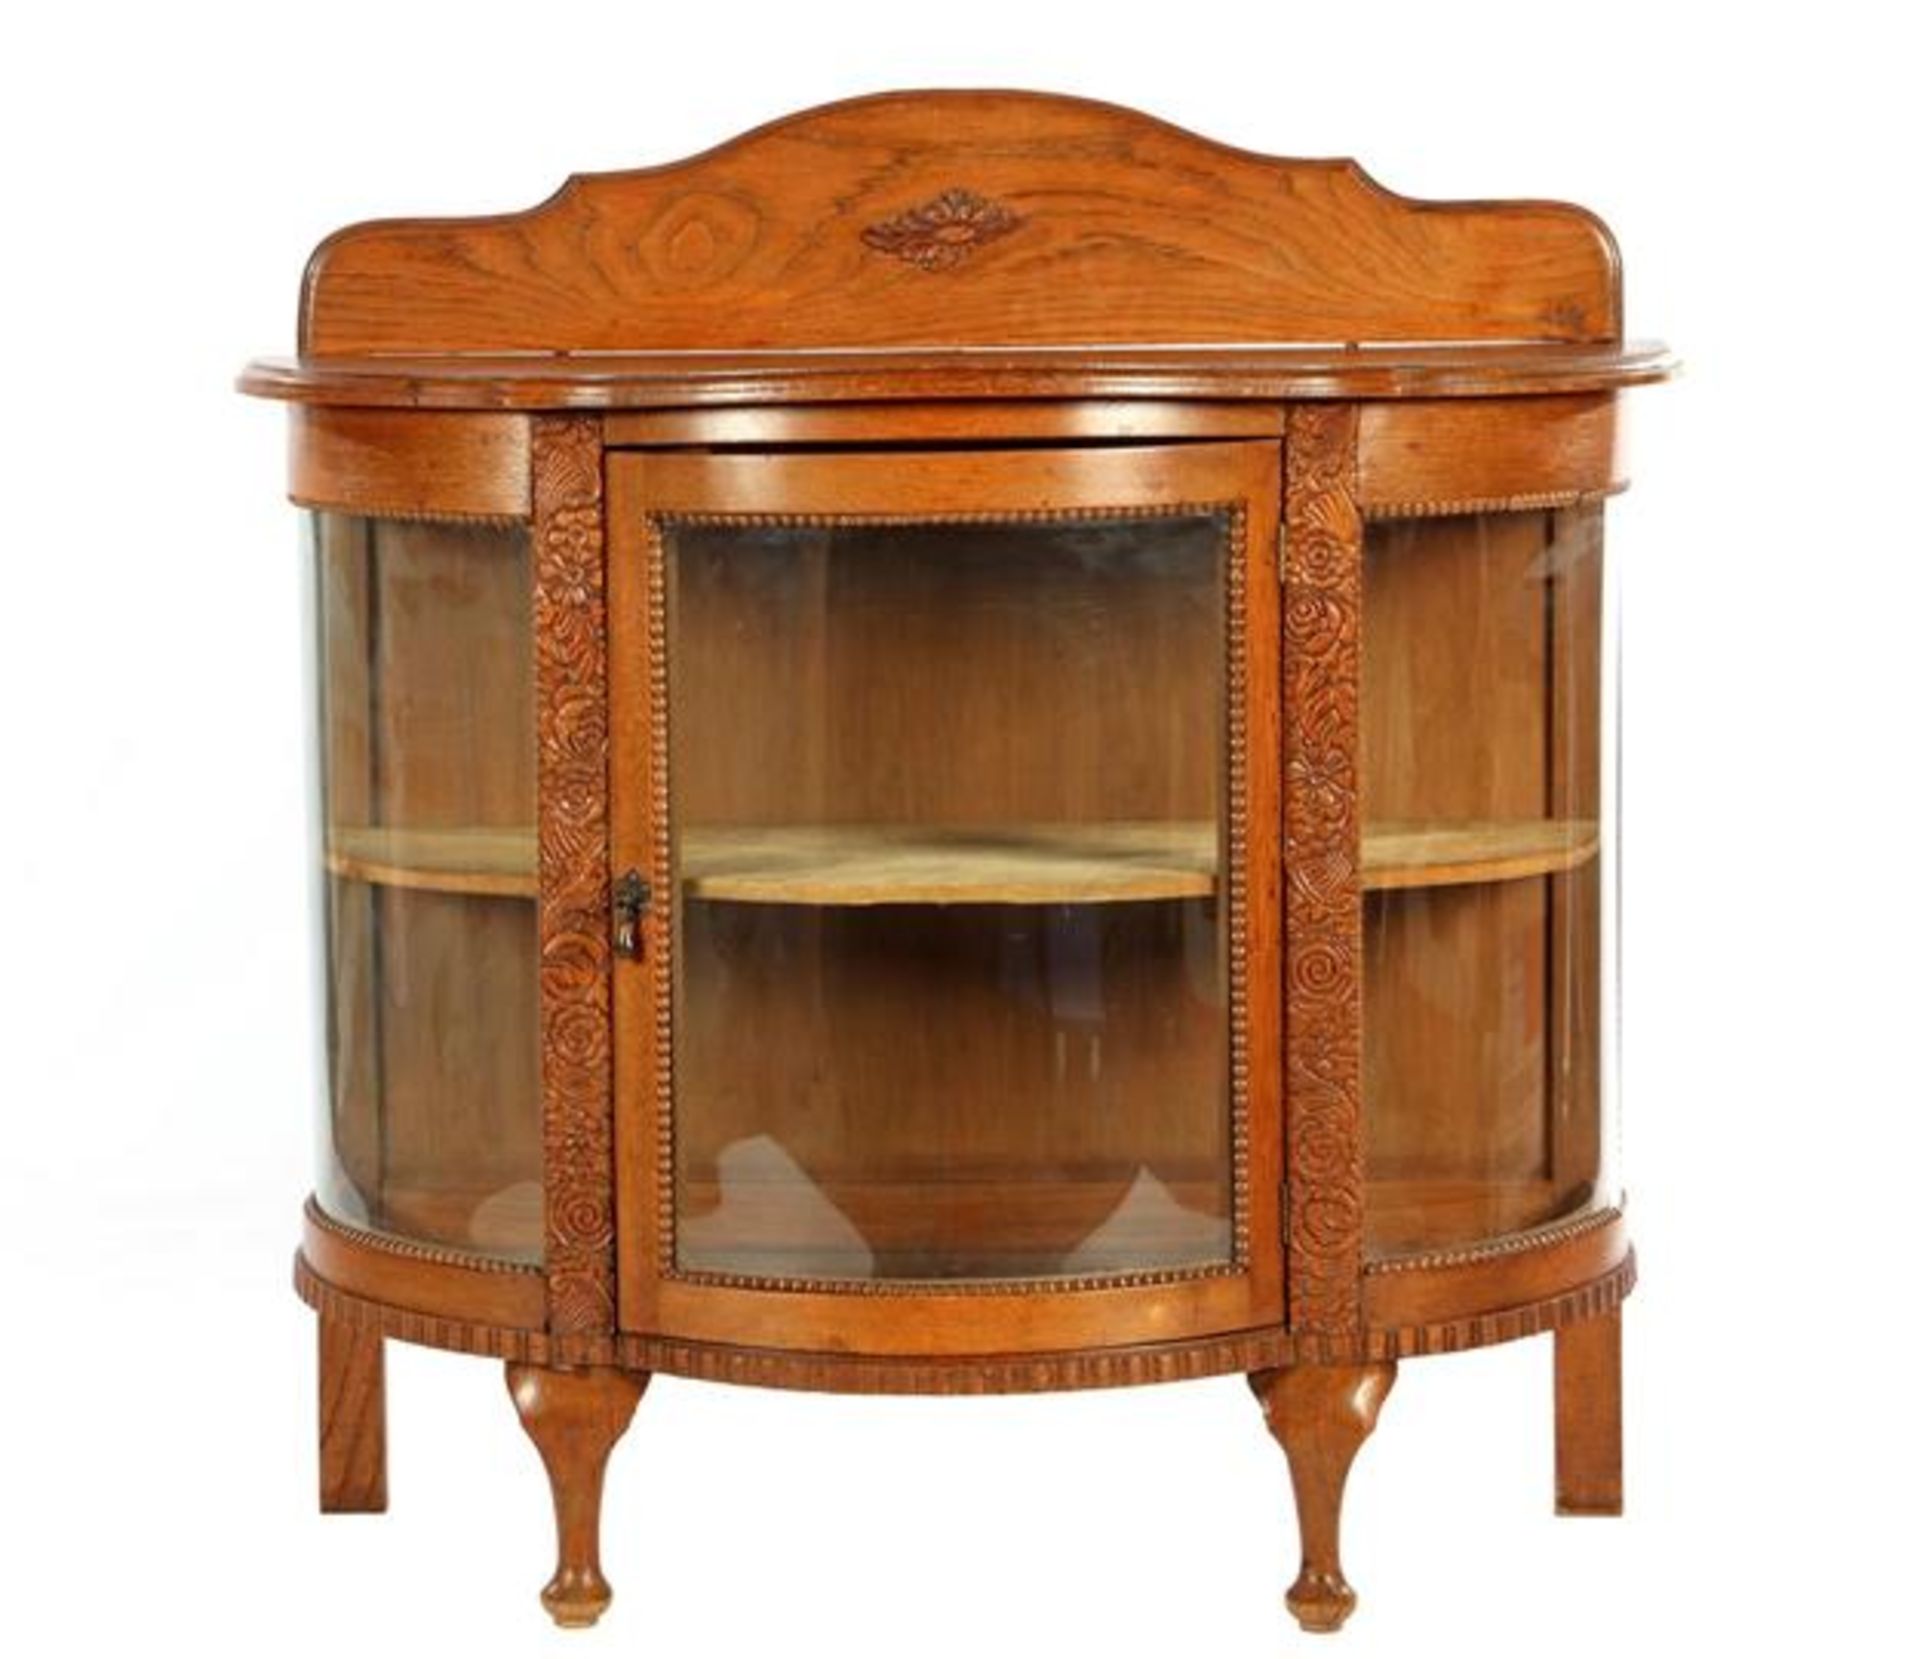 Oak 1-door & nbsp; wall display cabinet with floral stitching, 92 cm high, 91 cm wide and 41 cm